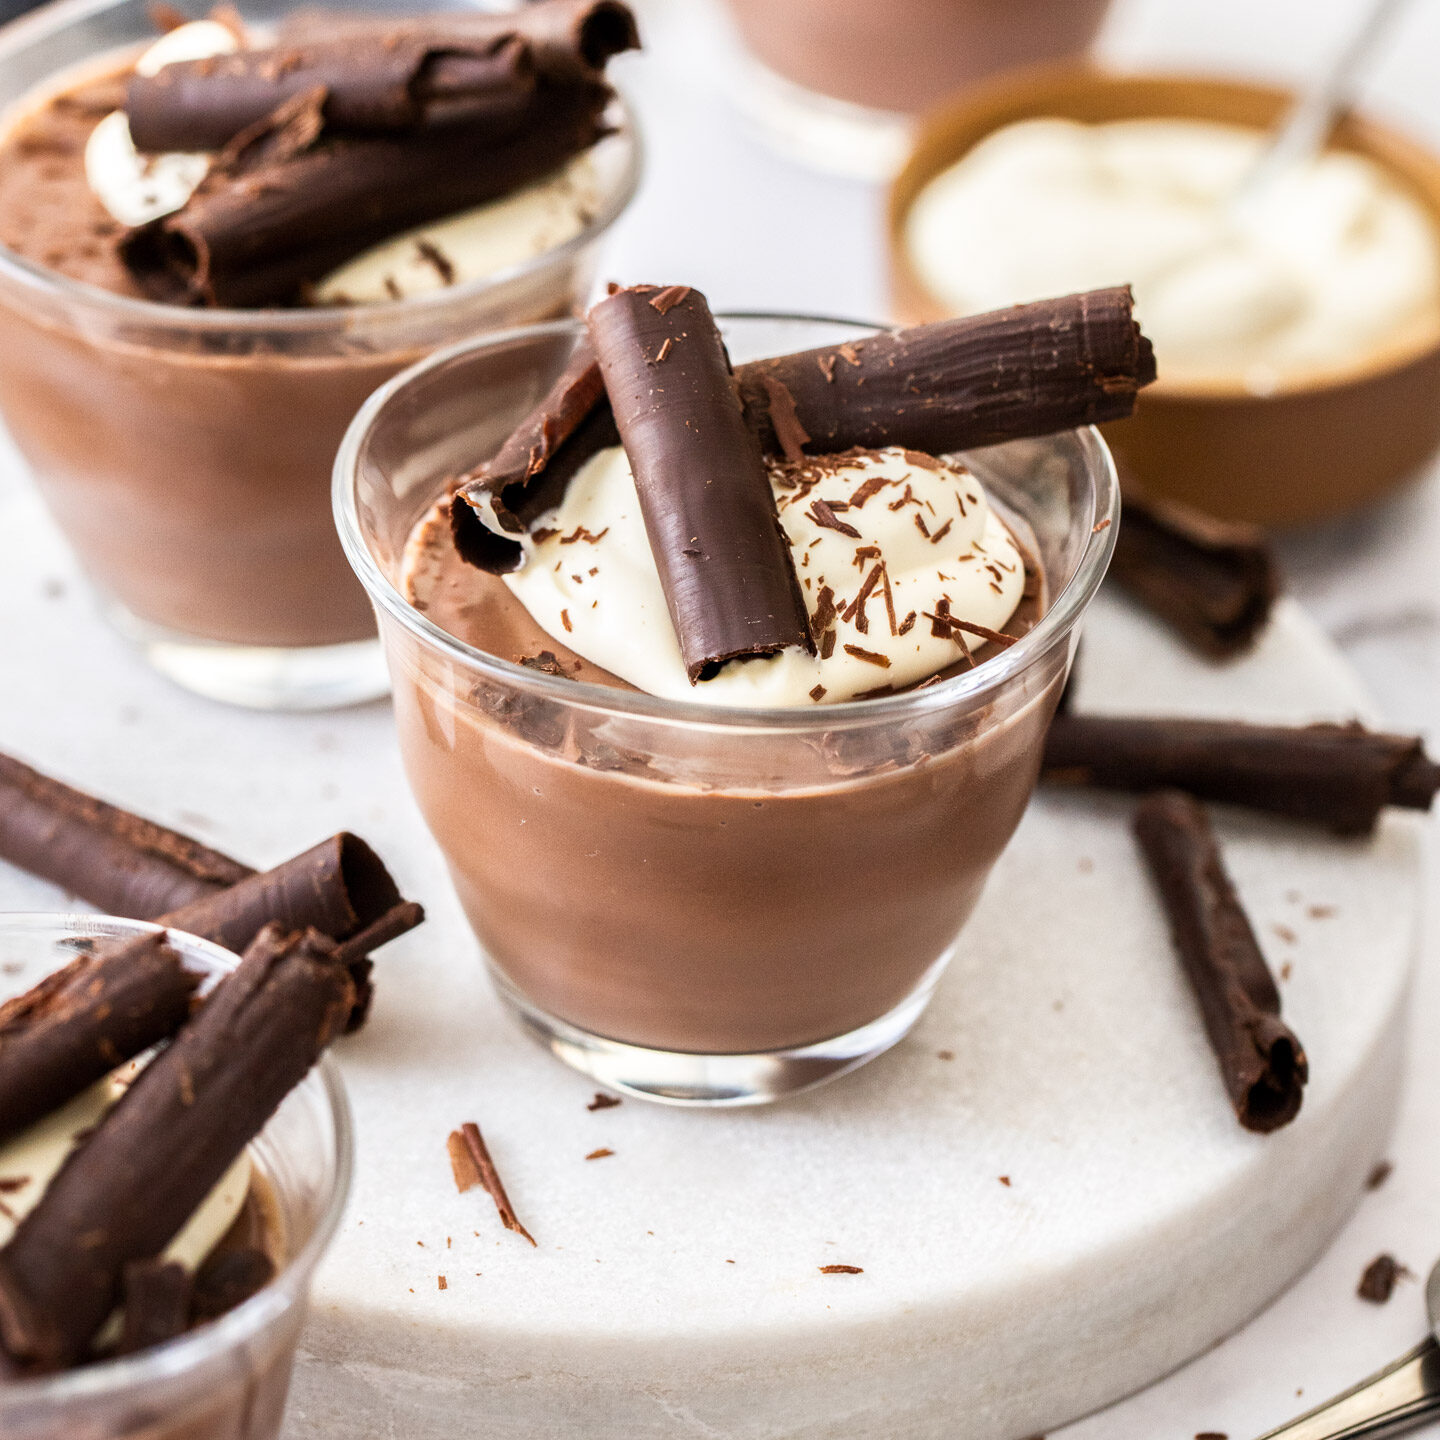 Chocolate pots topped with cream and chocolate curls.